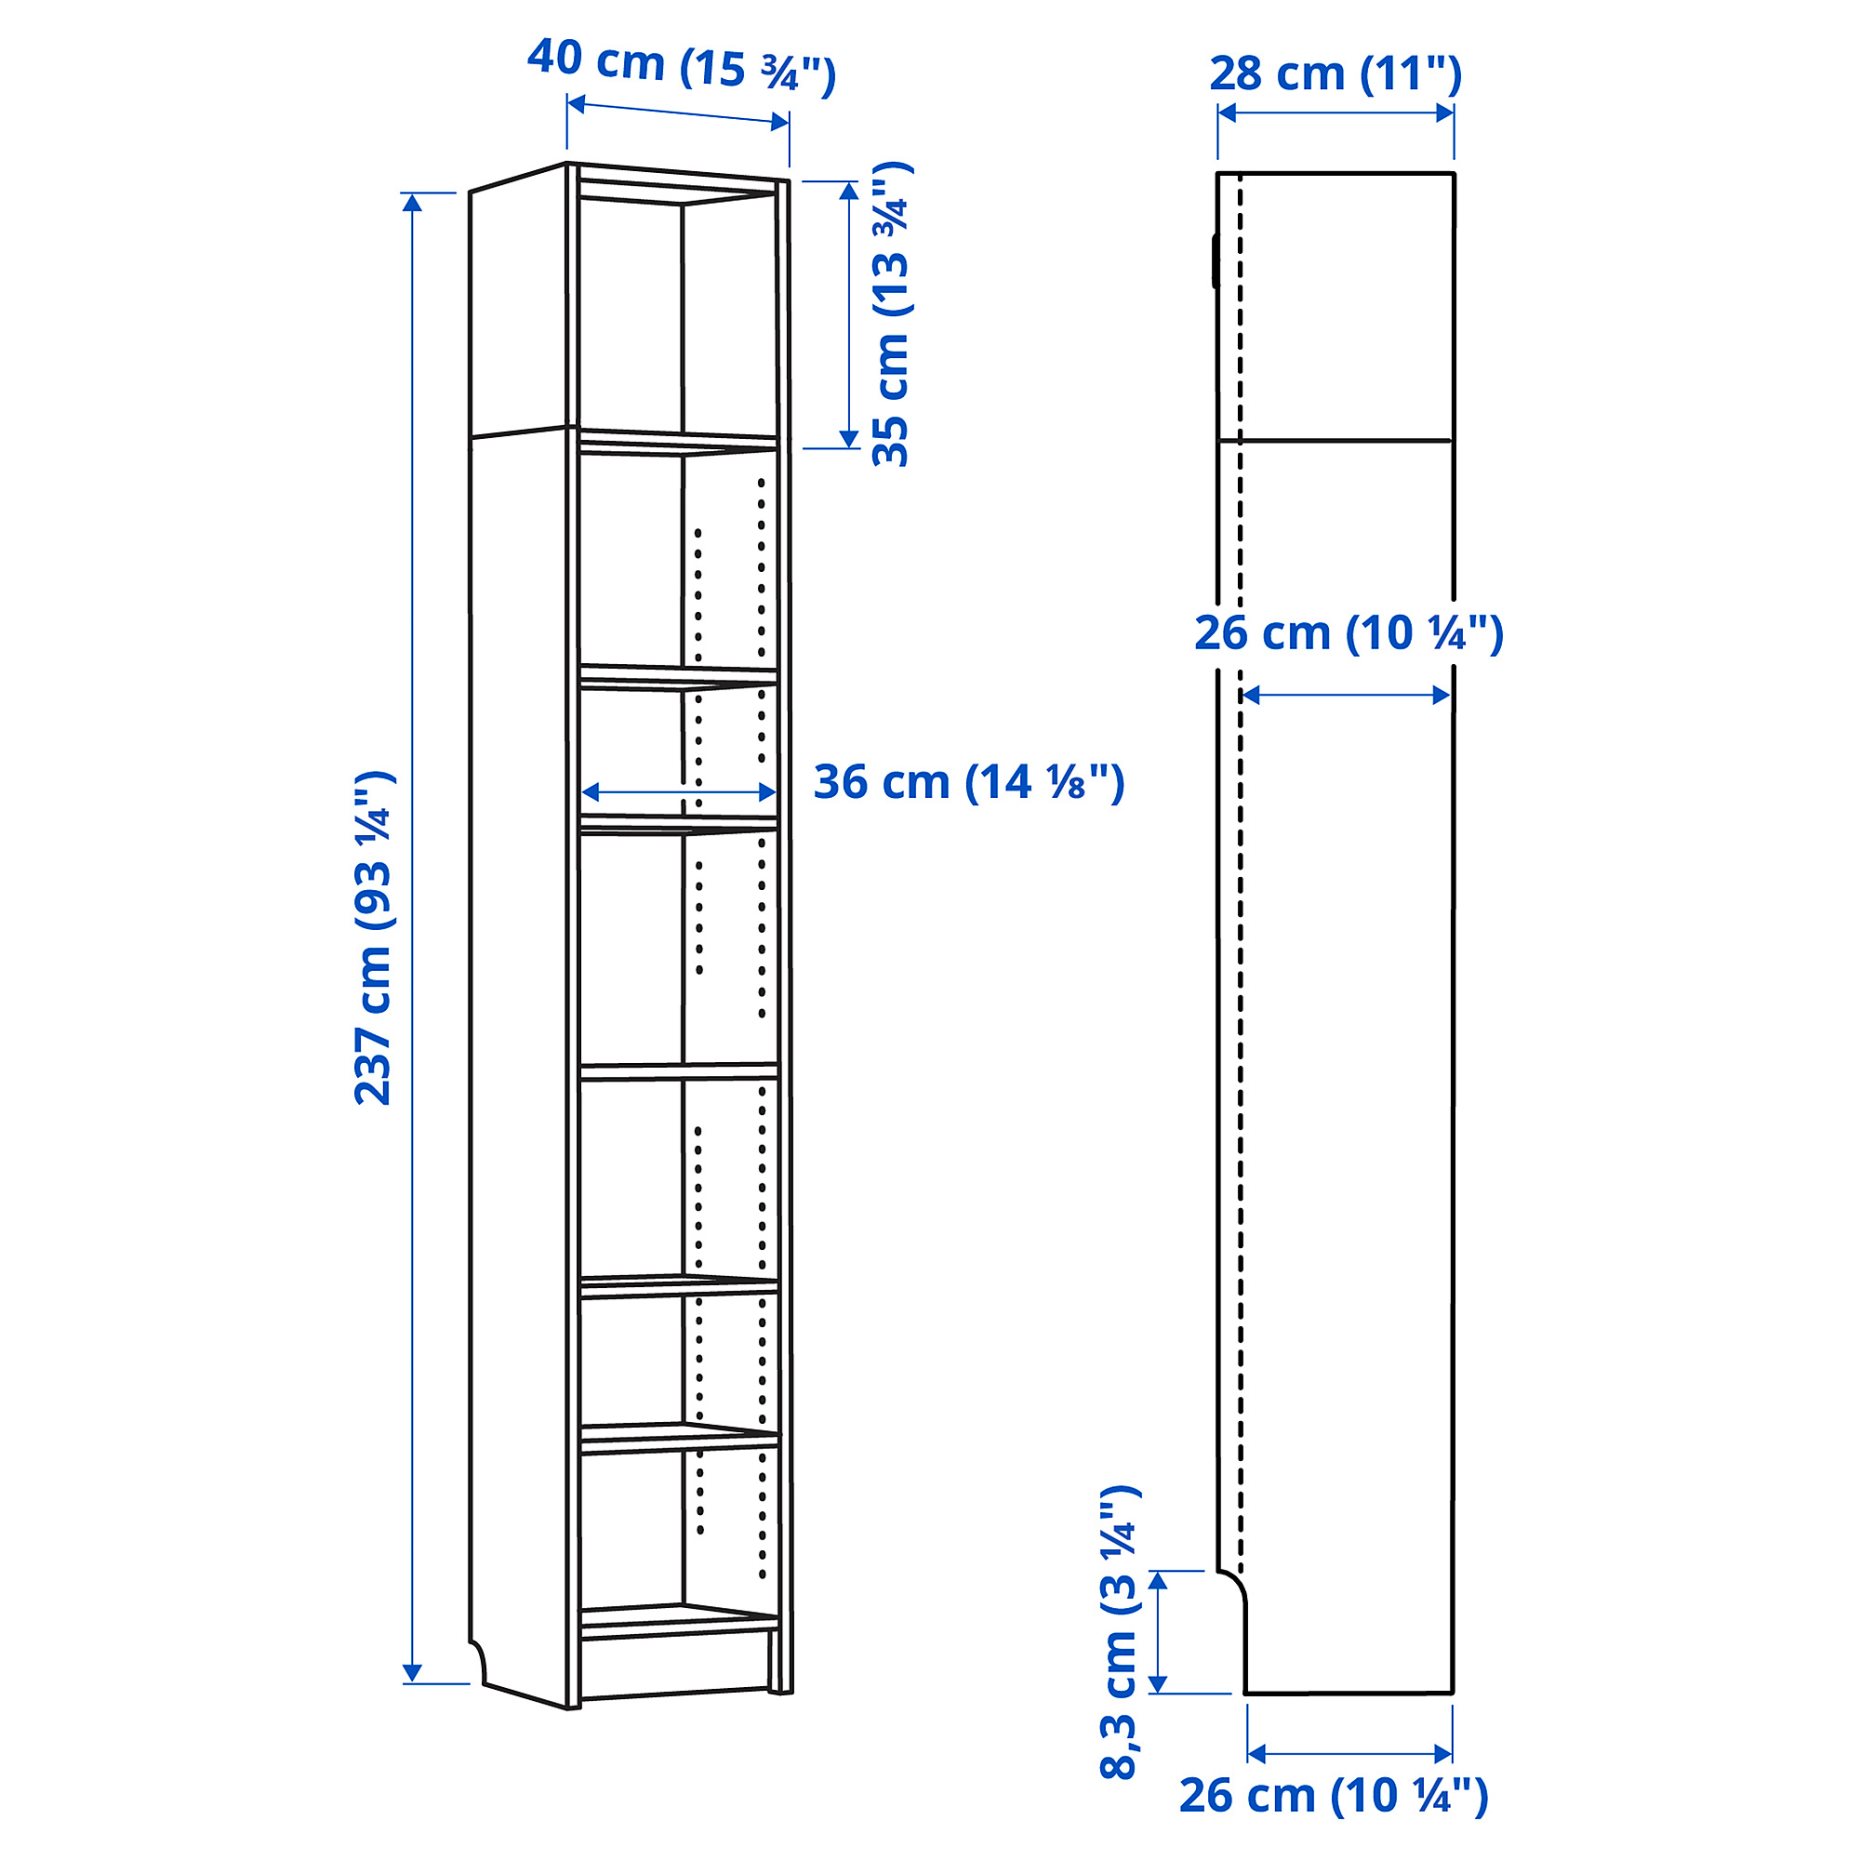 BILLY, bookcase with height extension unit, 392.499.38